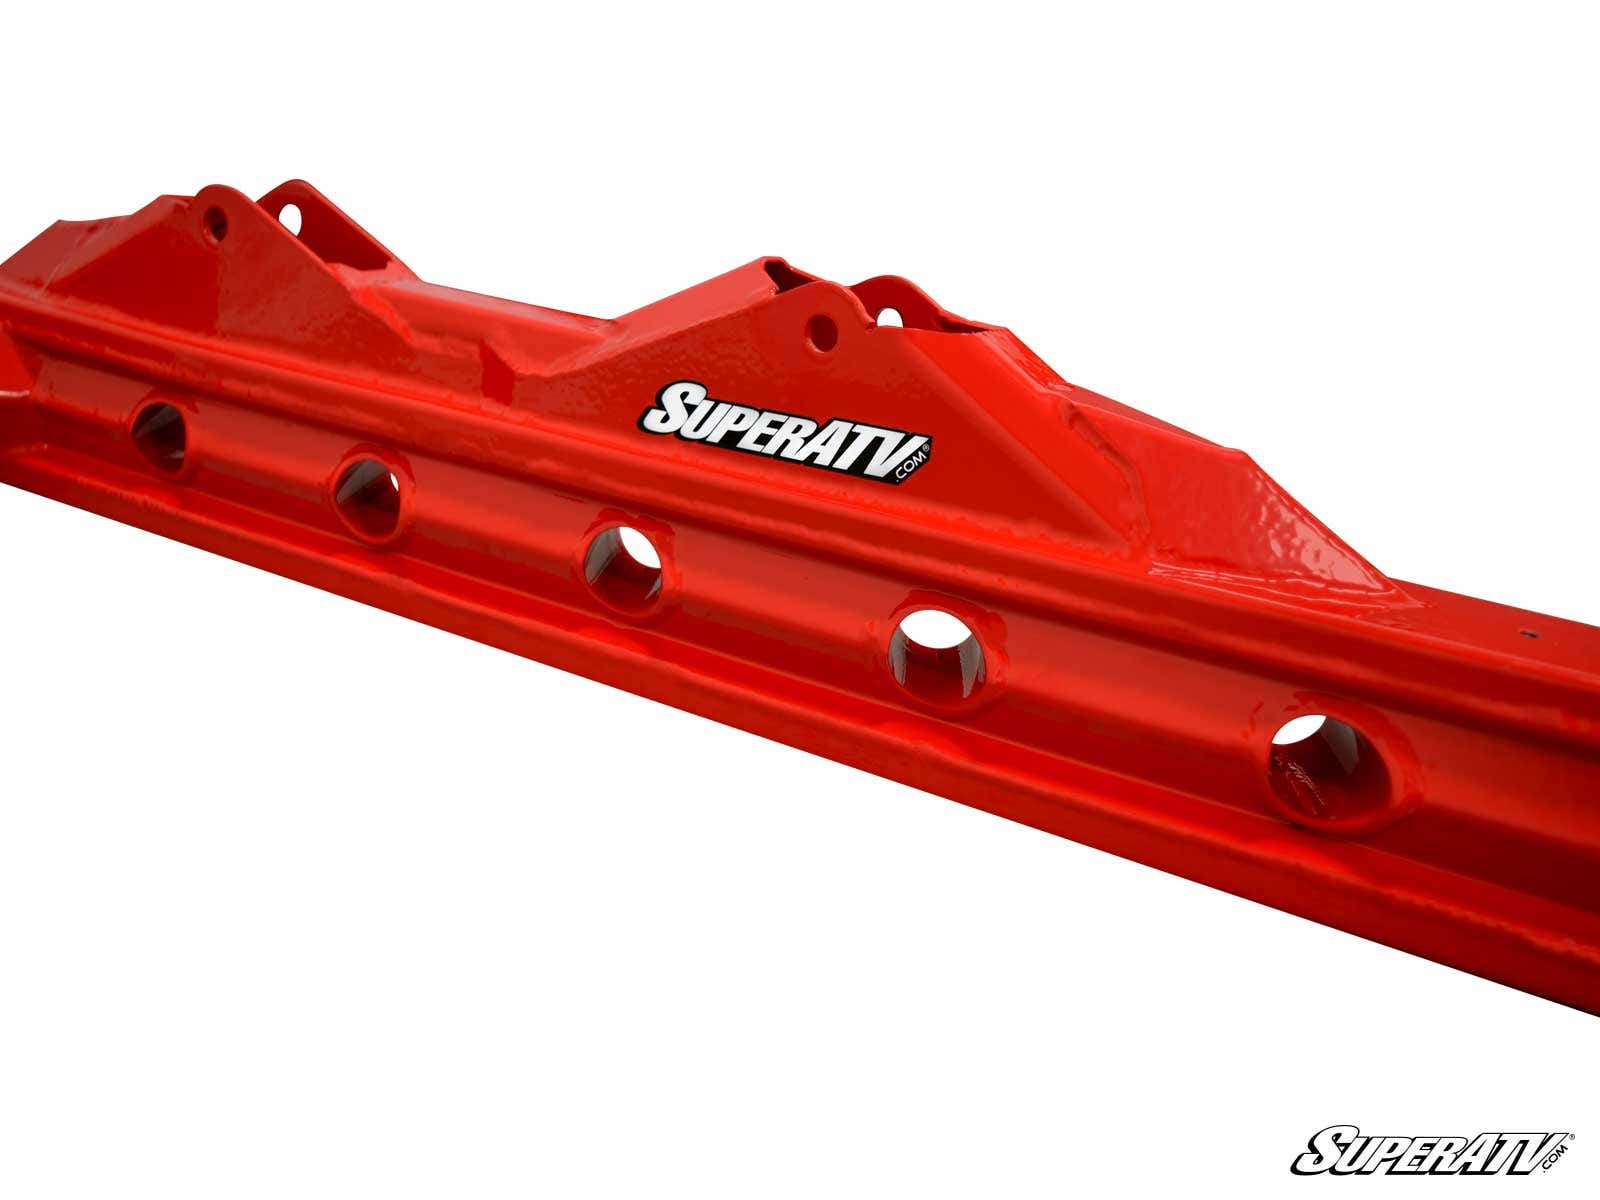 Extended Trailing Arms 1" Rear Offset Orange - For Polaris RZR RS1 - Click Image to Close